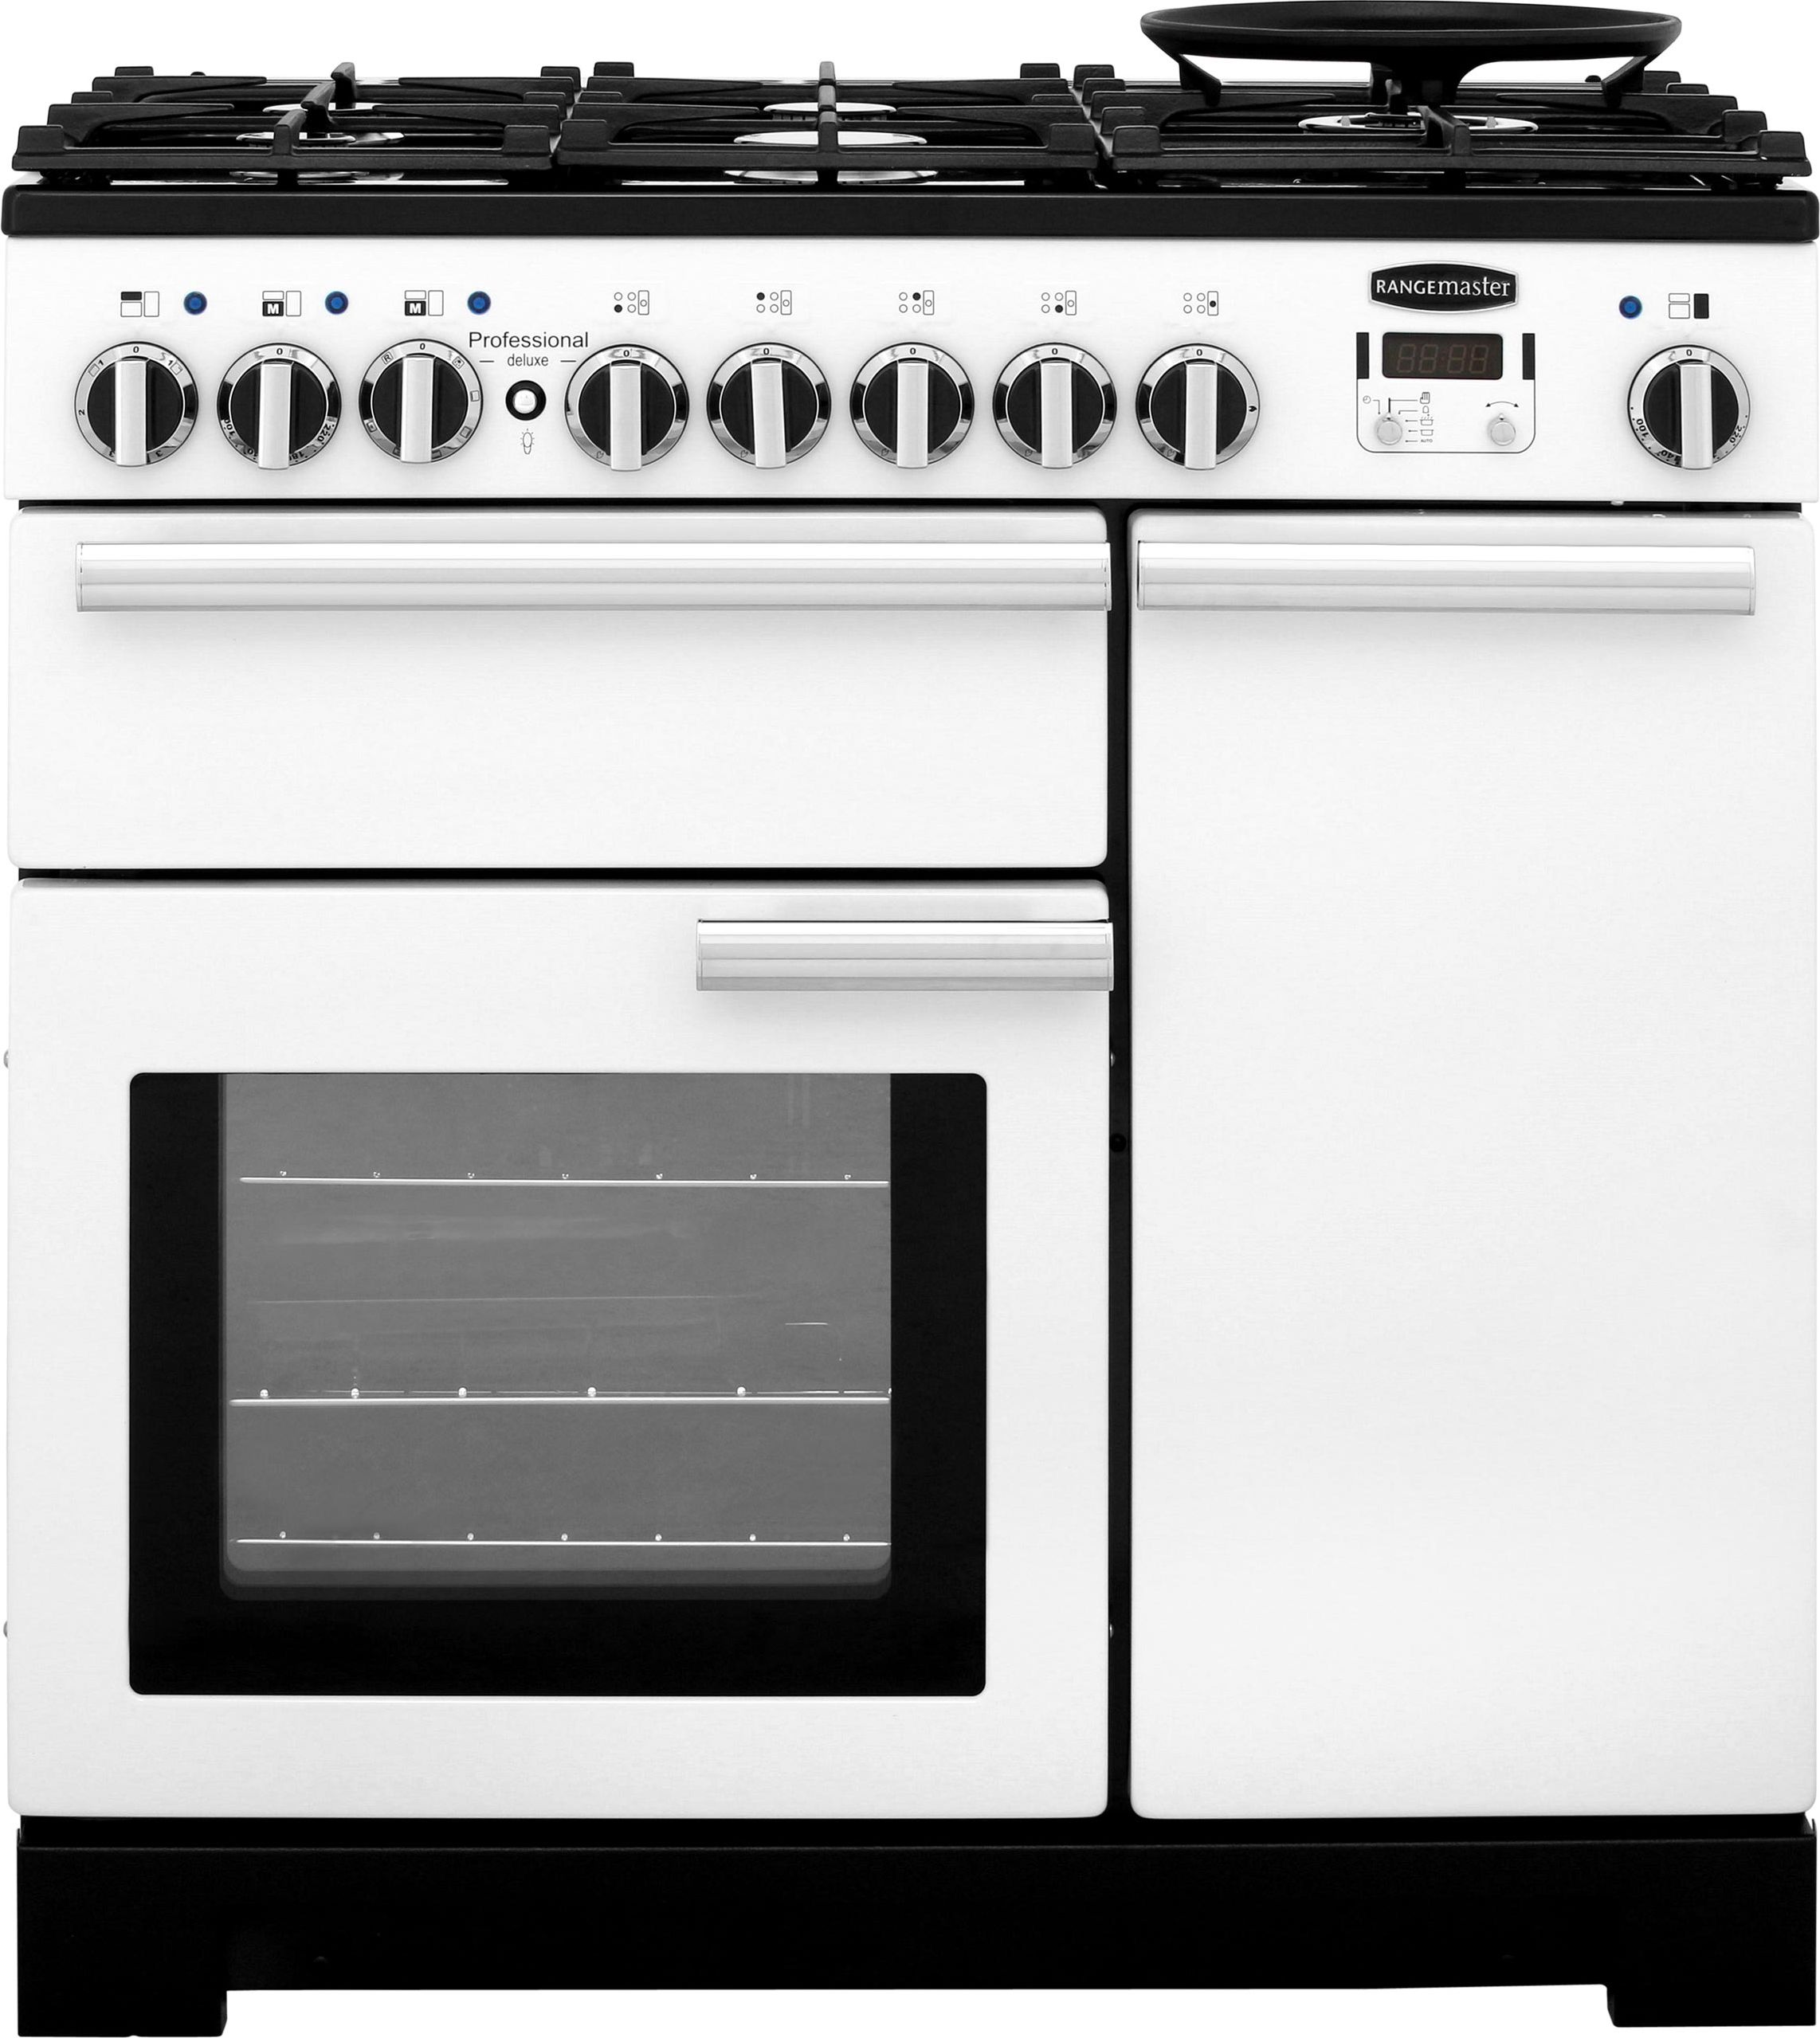 Rangemaster Professional Deluxe PDL90DFFWH/C 90cm Dual Fuel Range Cooker - White - A/A Rated, White